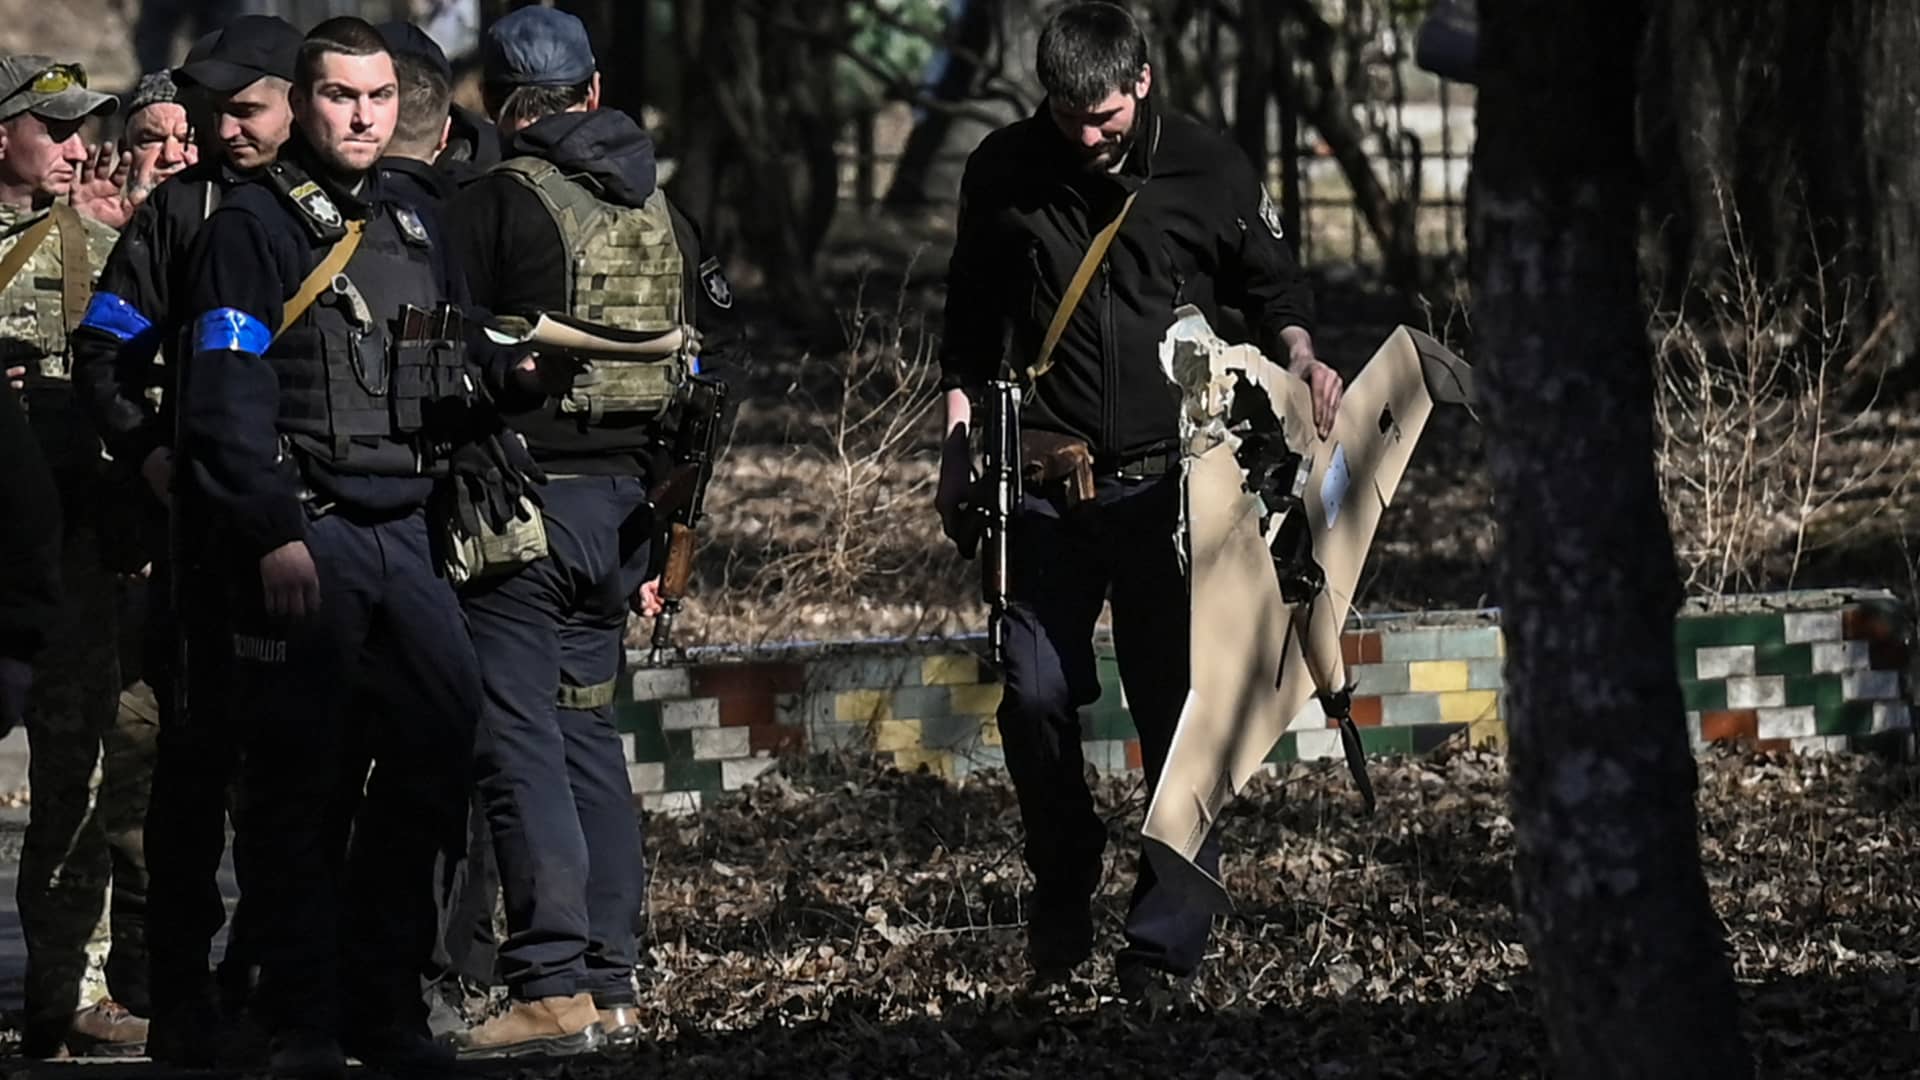 An Ukranian serviceman carries a downed Russian drone in the area of a research institute, part of Ukraine's National Academy of Science, after a strike, in northwestern Kyiv, on March 22, 2022.